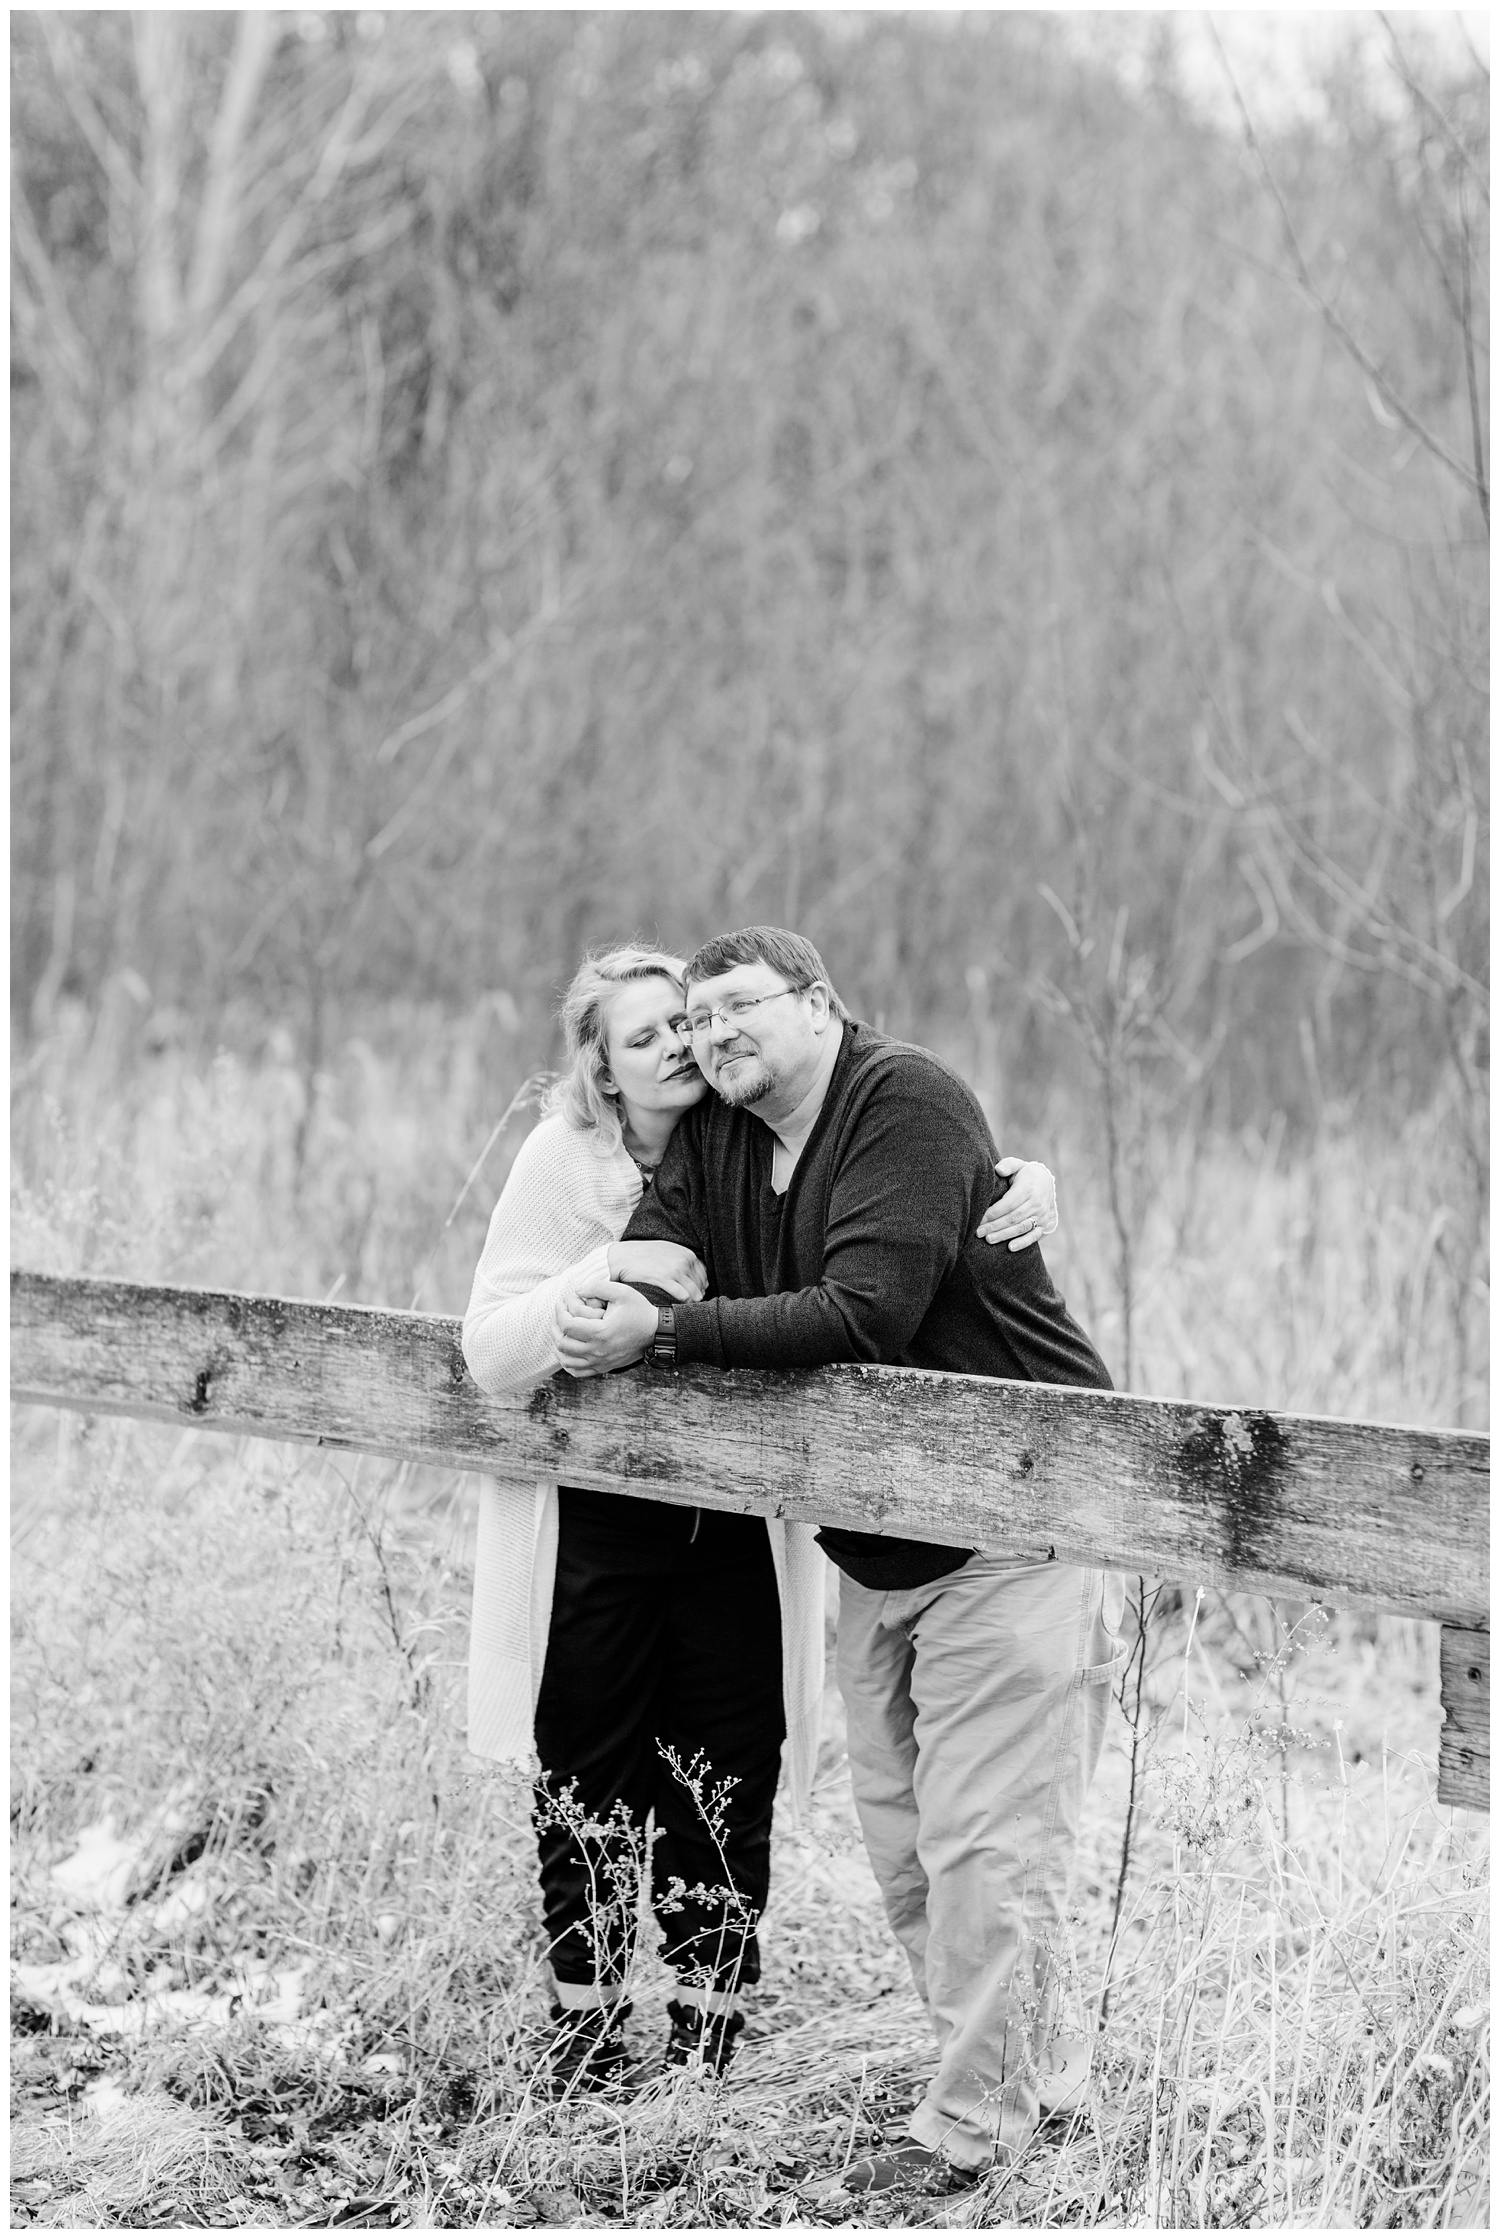 Engagement shoot in a grassy pasture in central Iowa in mid-March